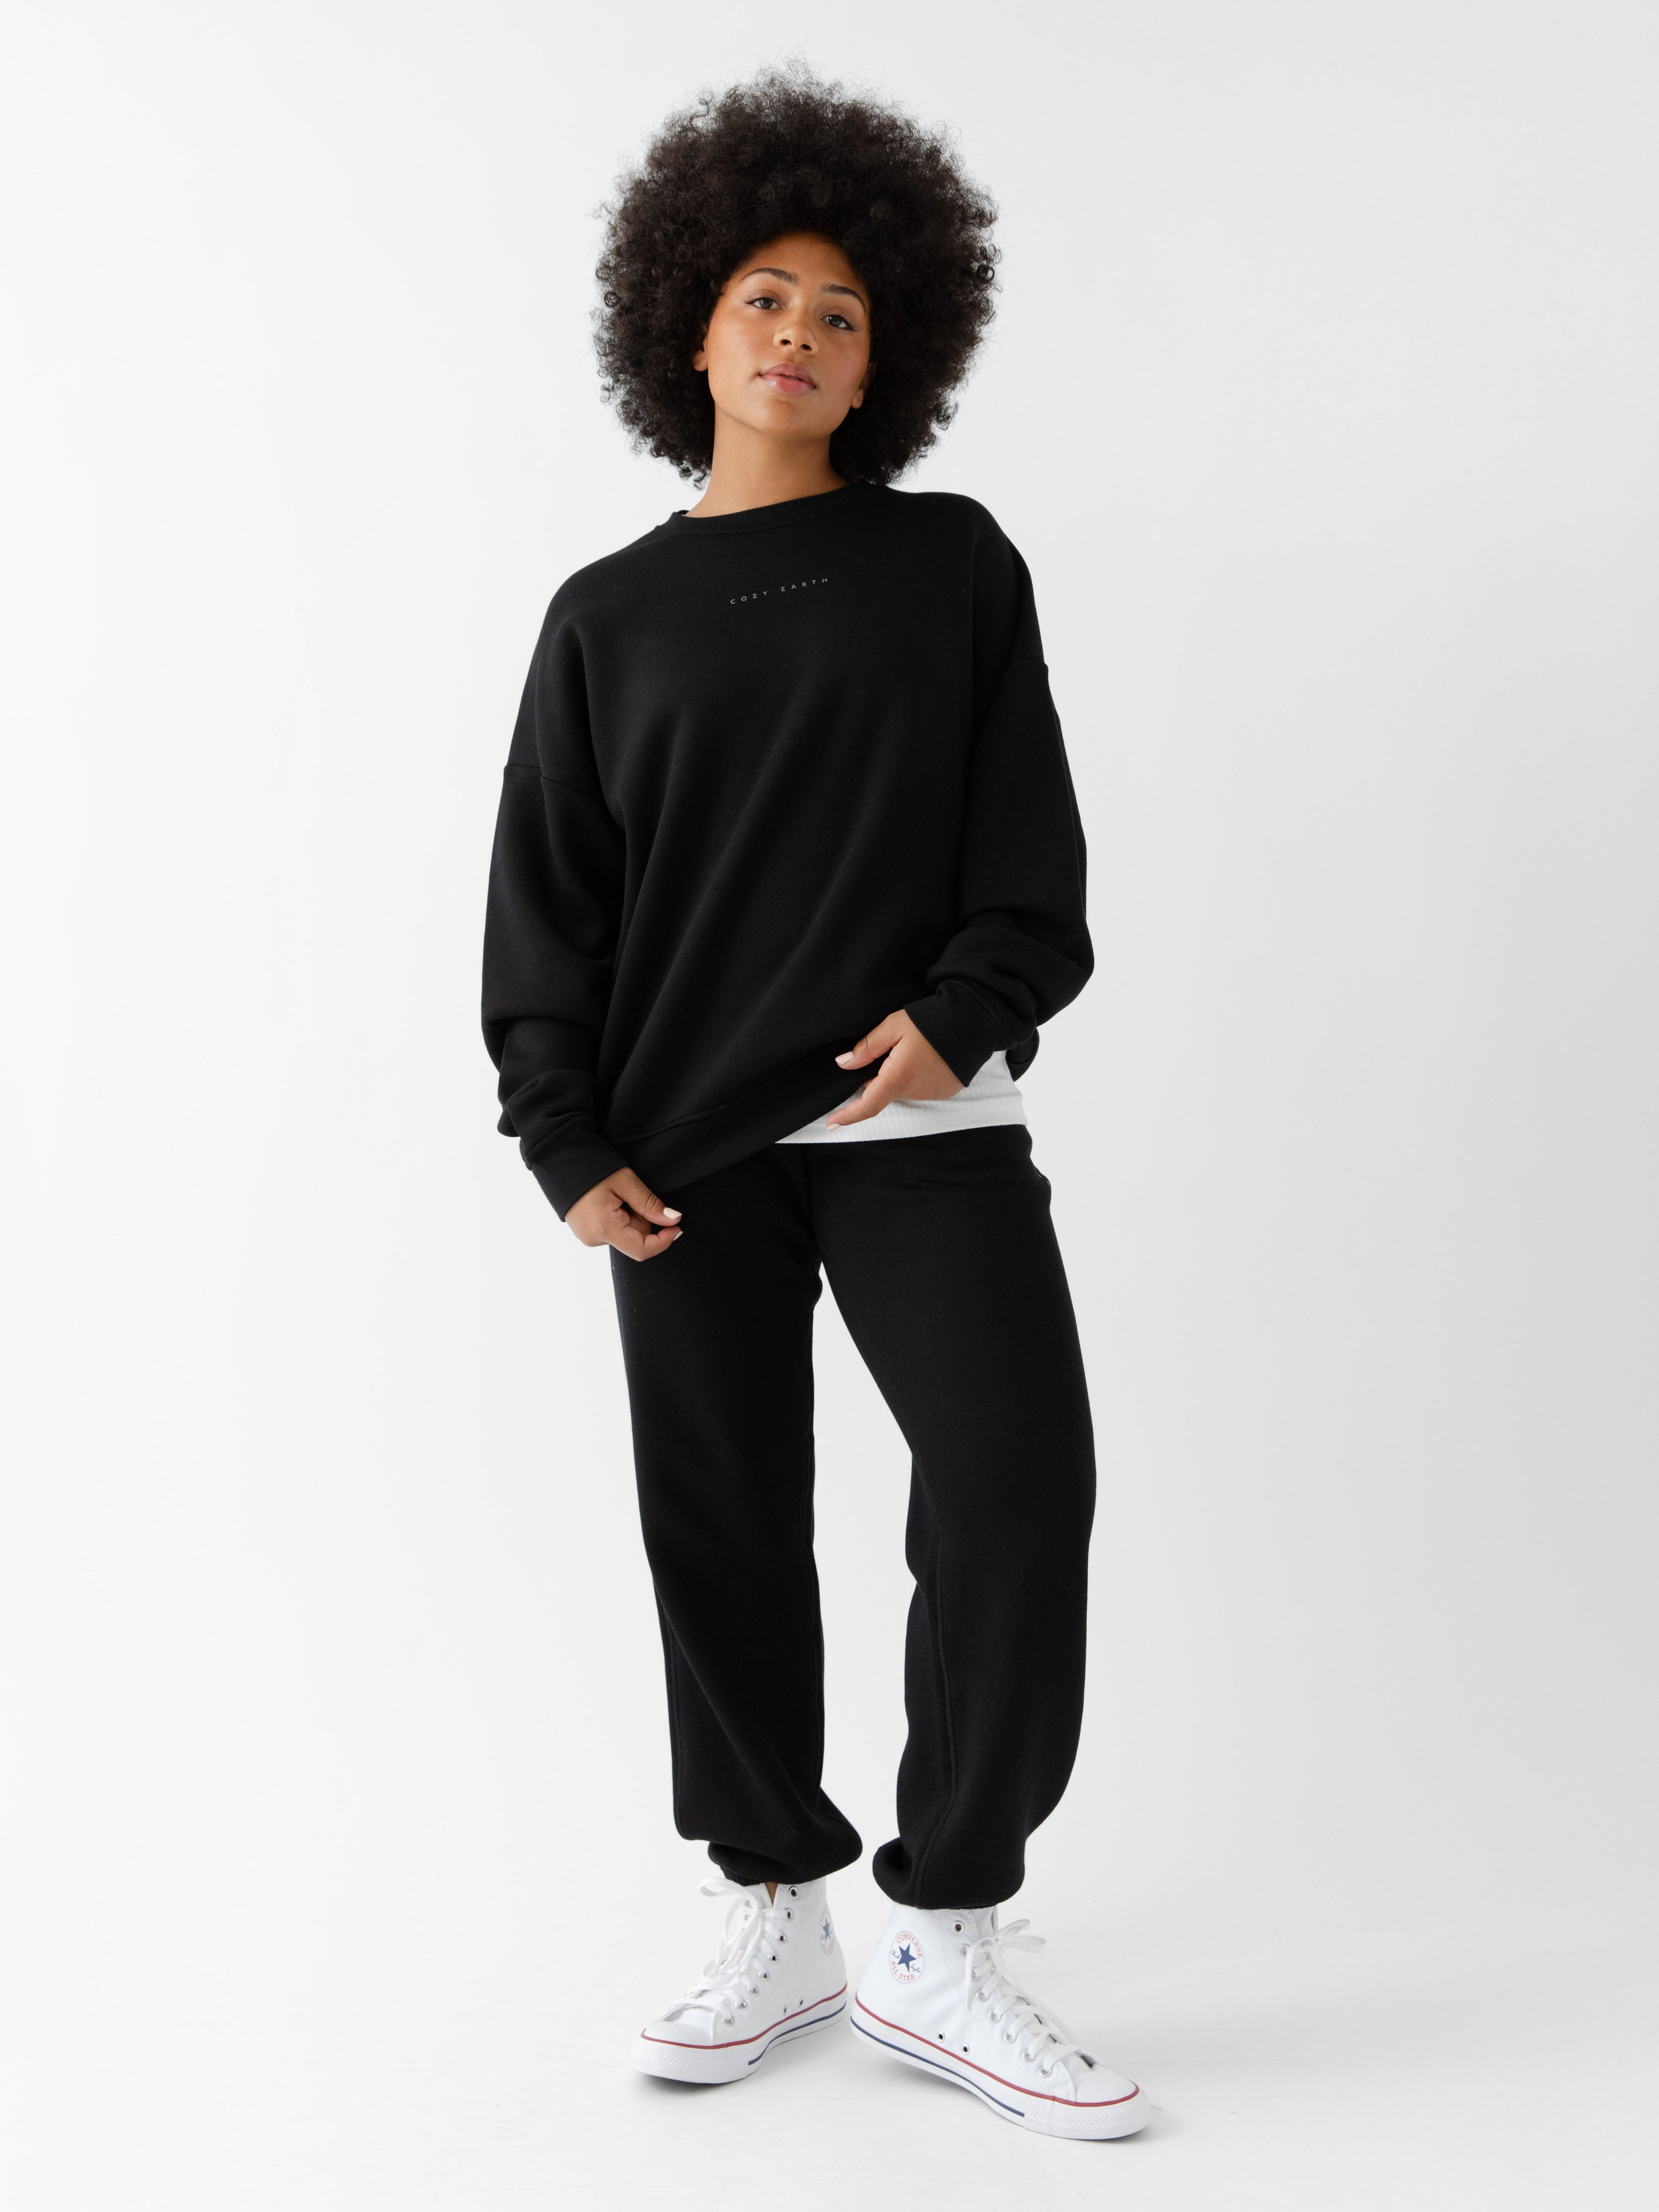 Black CityScape Joggers. The Joggers are being worn by a female model. The photo is taken with the models hand by the pocket of the joggers. The back ground is a crisp white background. |Color:Black